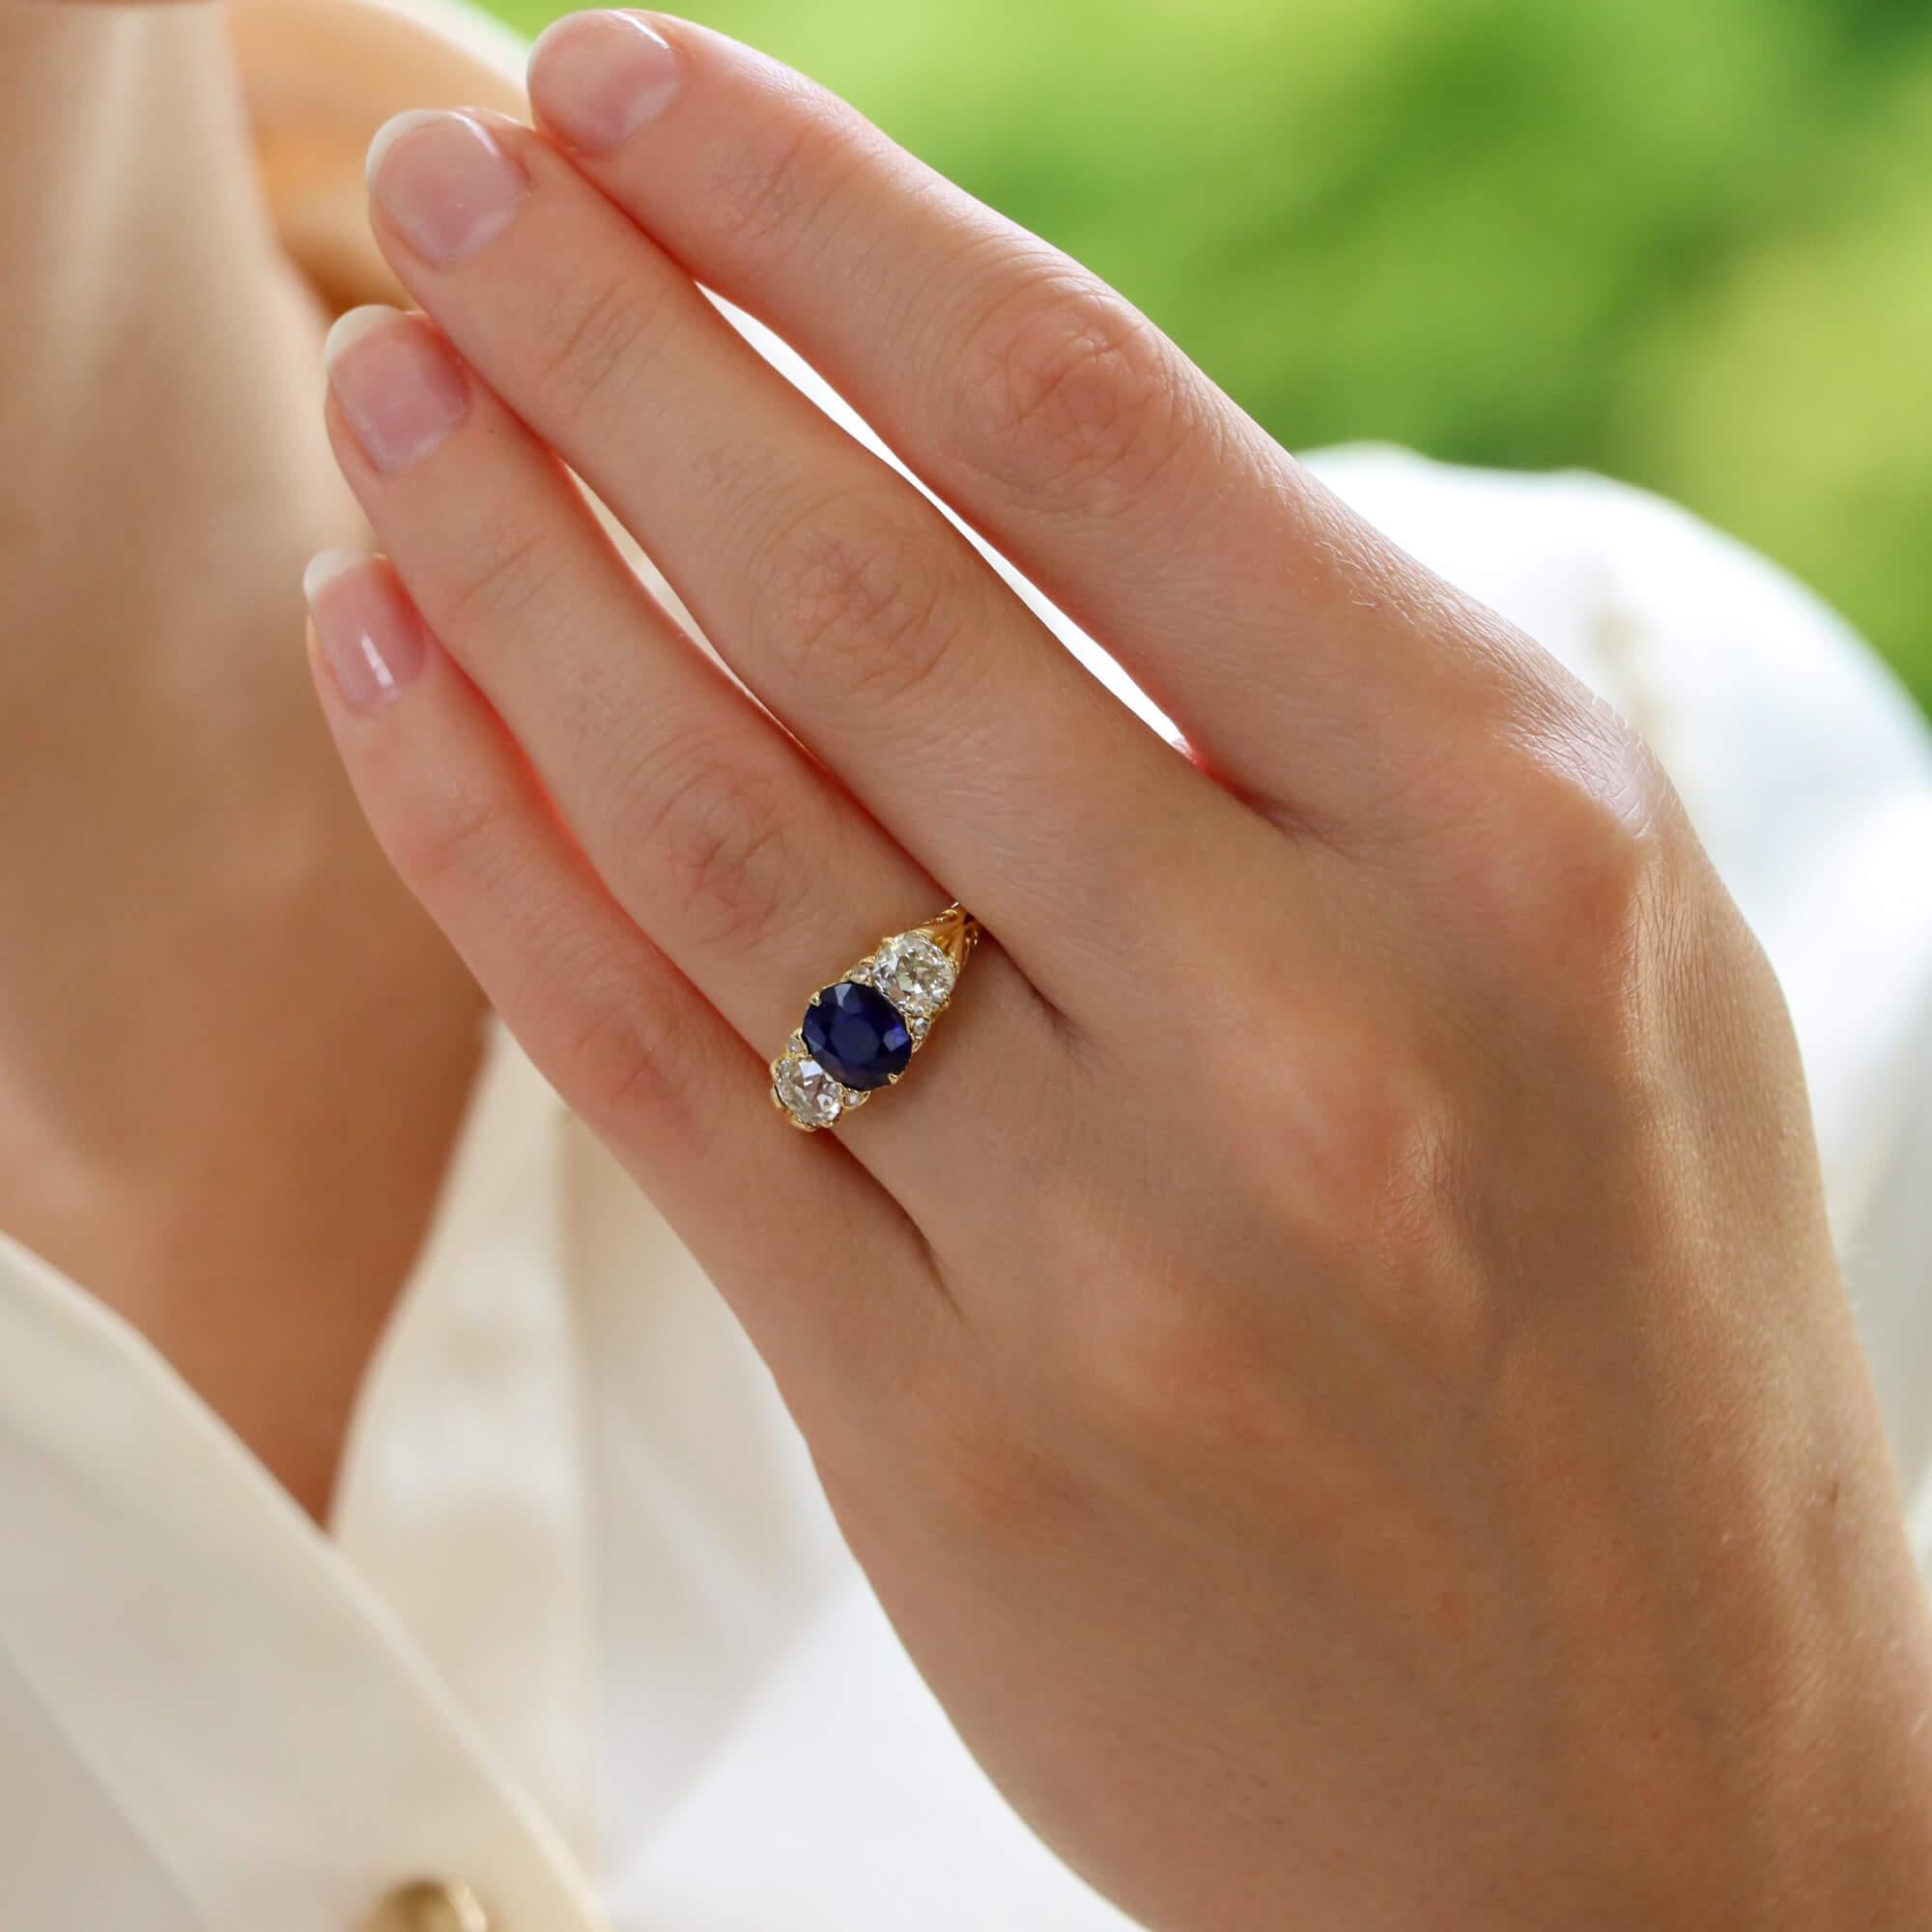  A beautiful late Victorian old mine cut diamond and sapphire three stone ring set in 18k yellow gold.

The ring is centrally set with a stunning 1.65-carat old cut vibrant blue sapphire. To either side of this central stone are two perfectly